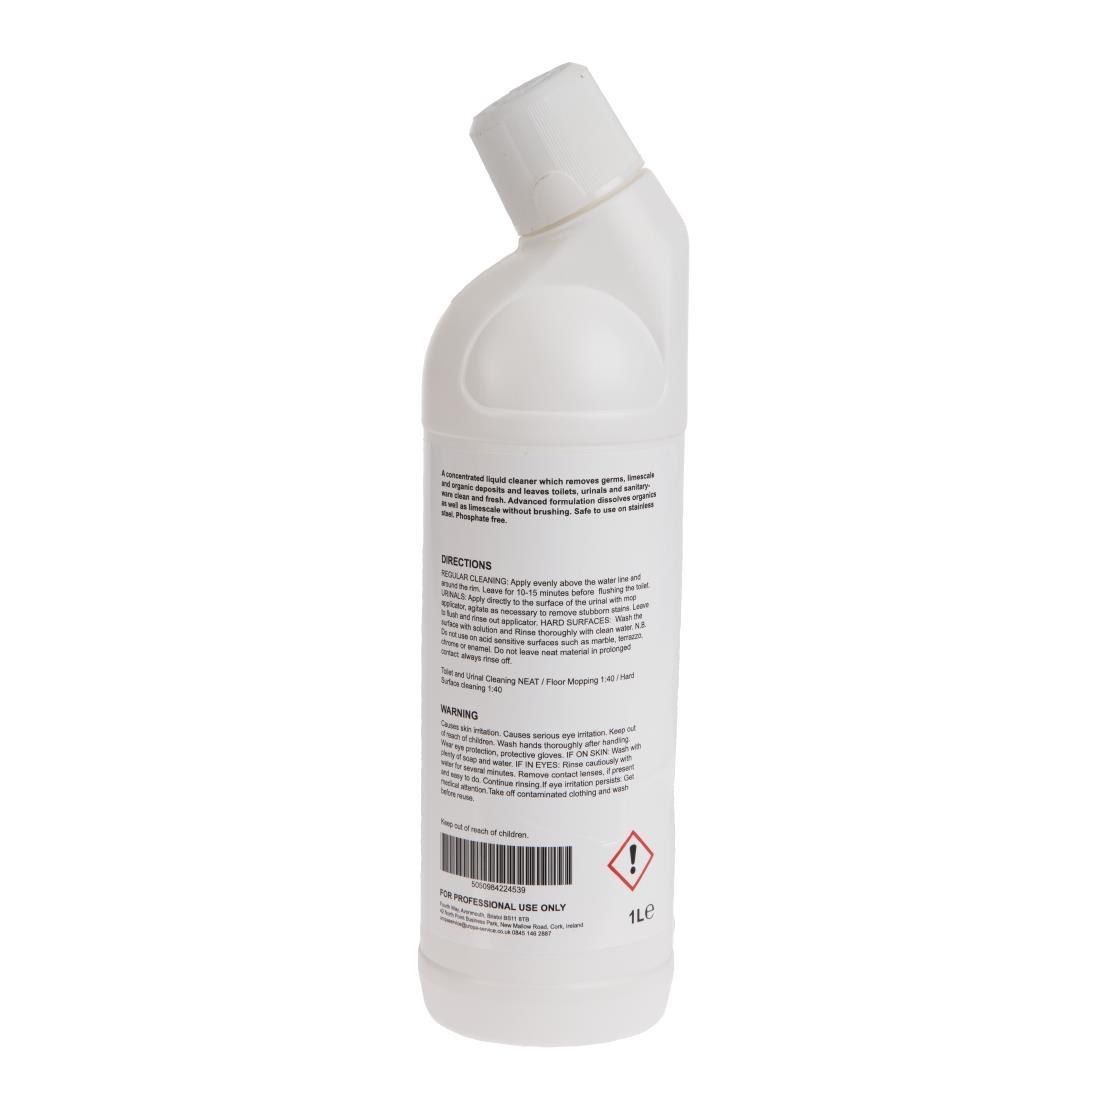 Jantex Toilet Cleaner Ready To Use 1Ltr - CF982  - 3